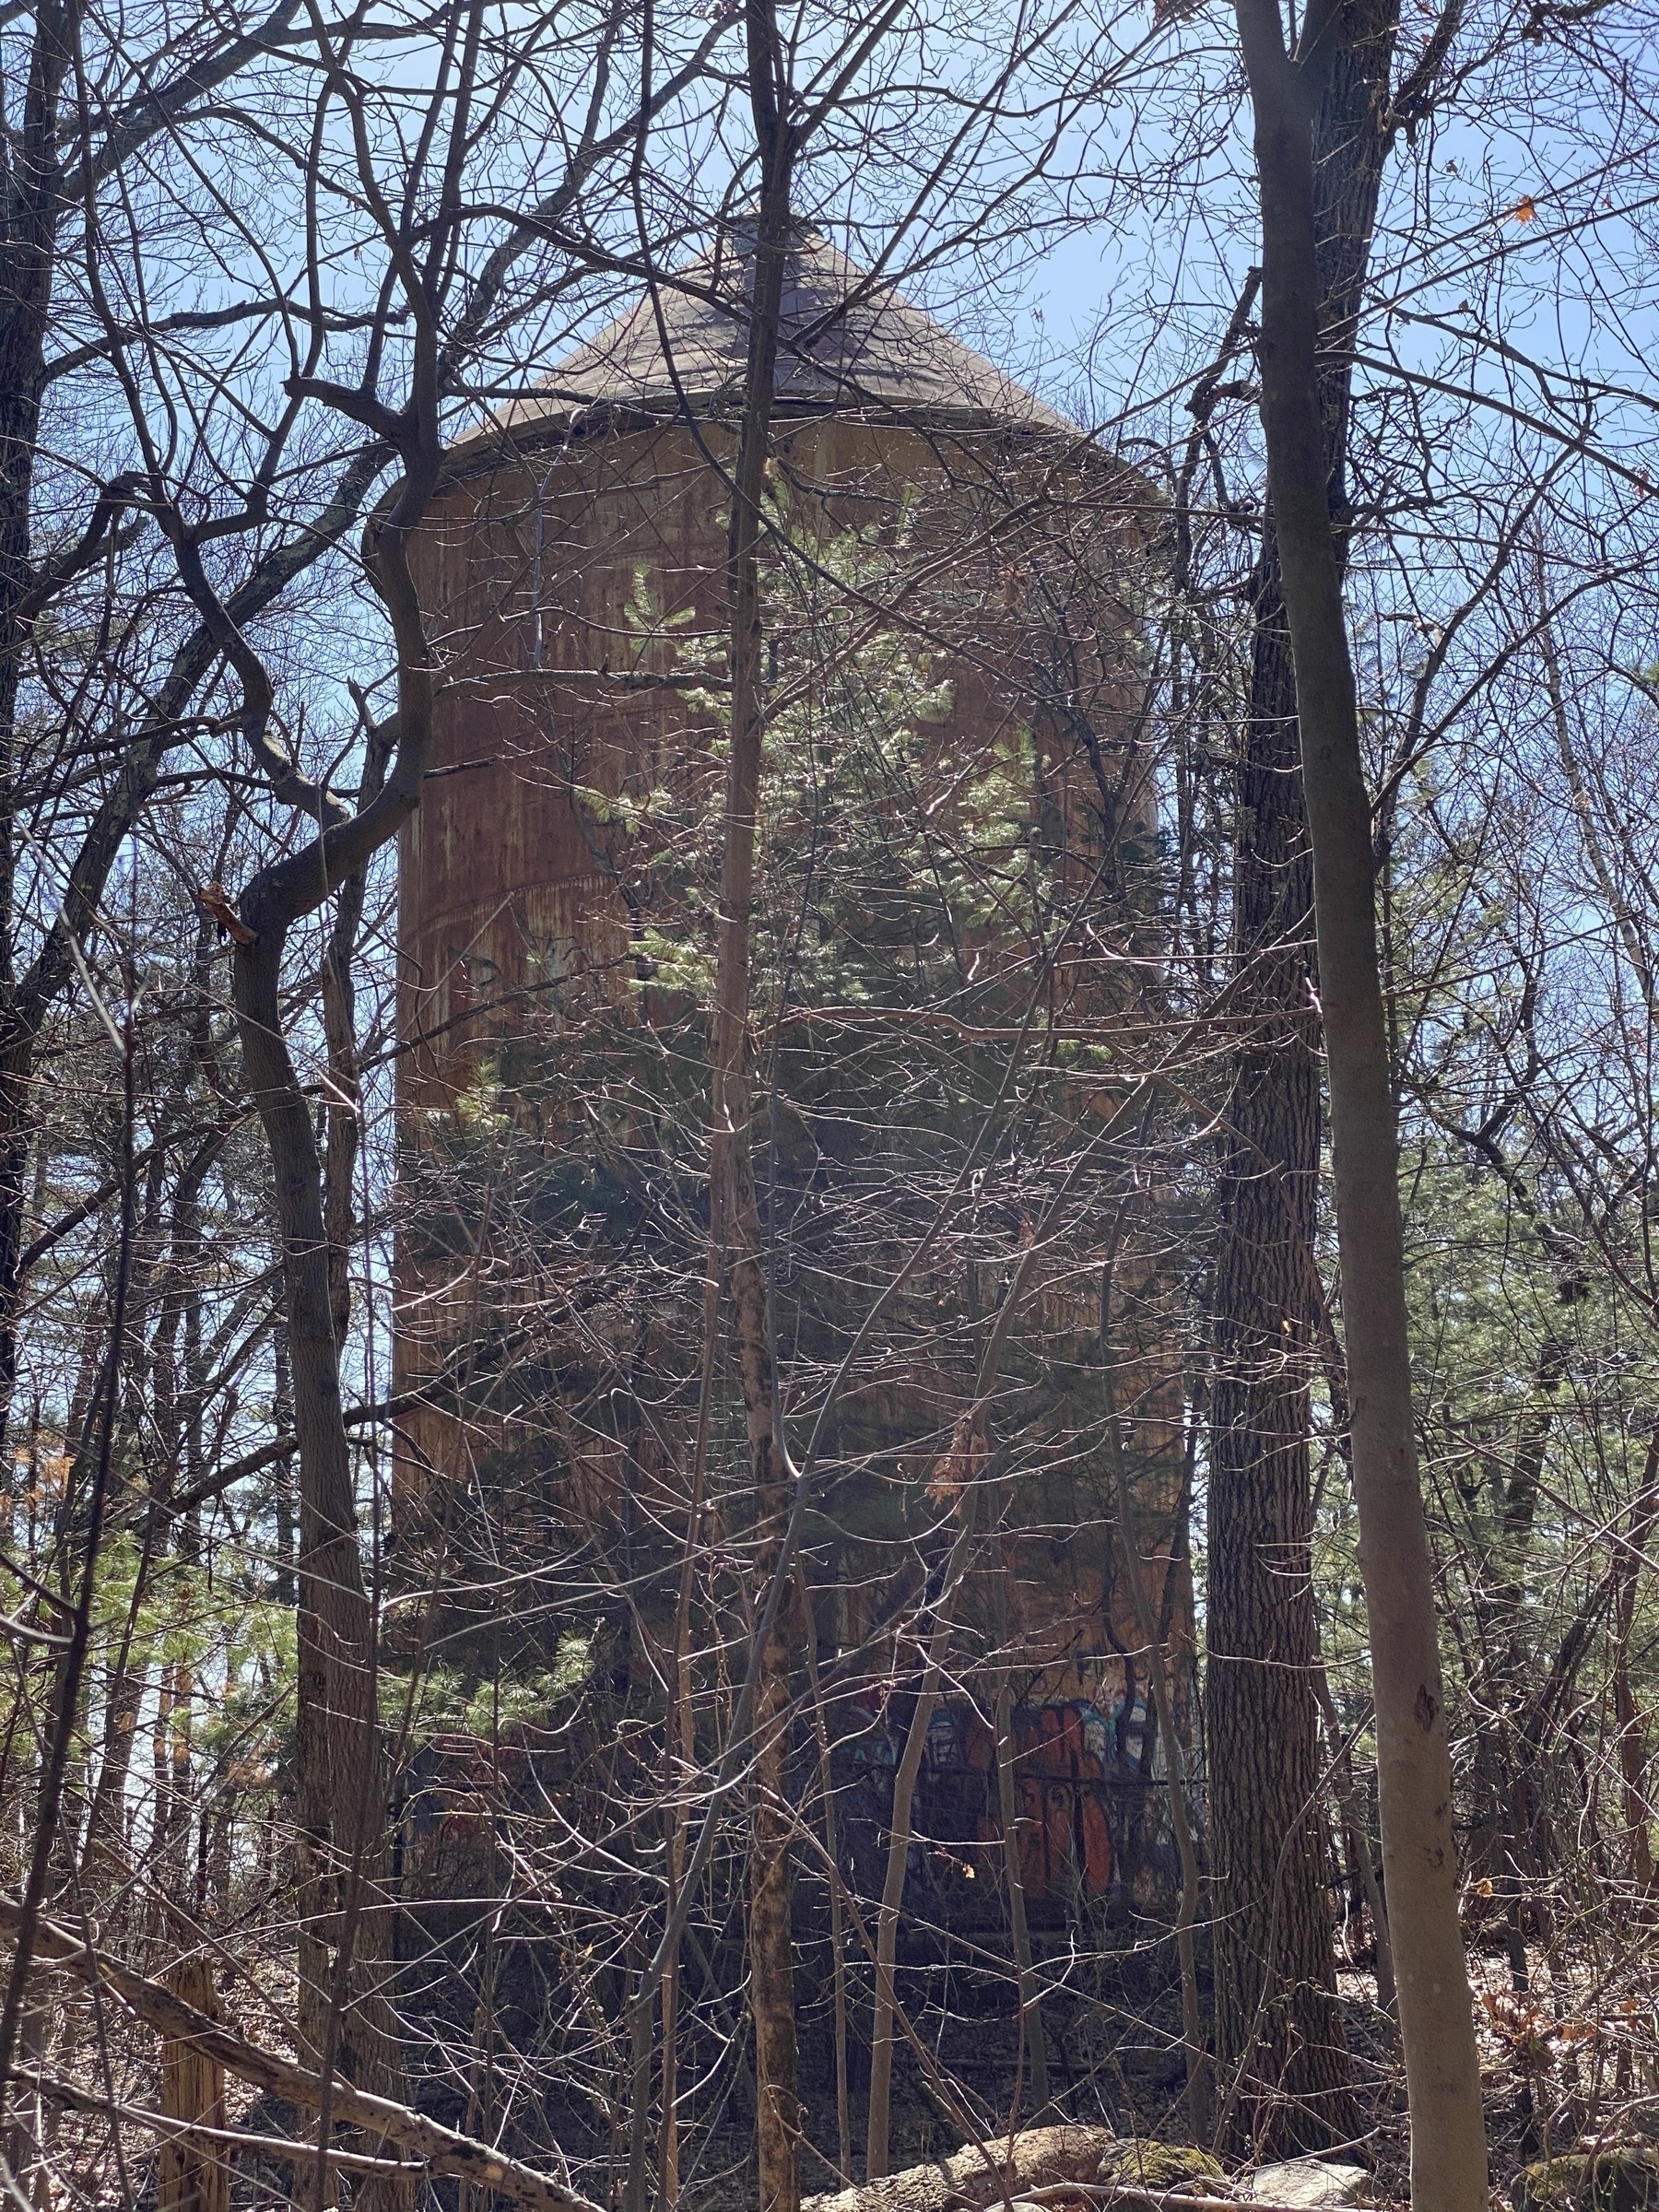 An old water tank surrounded by pine trees.